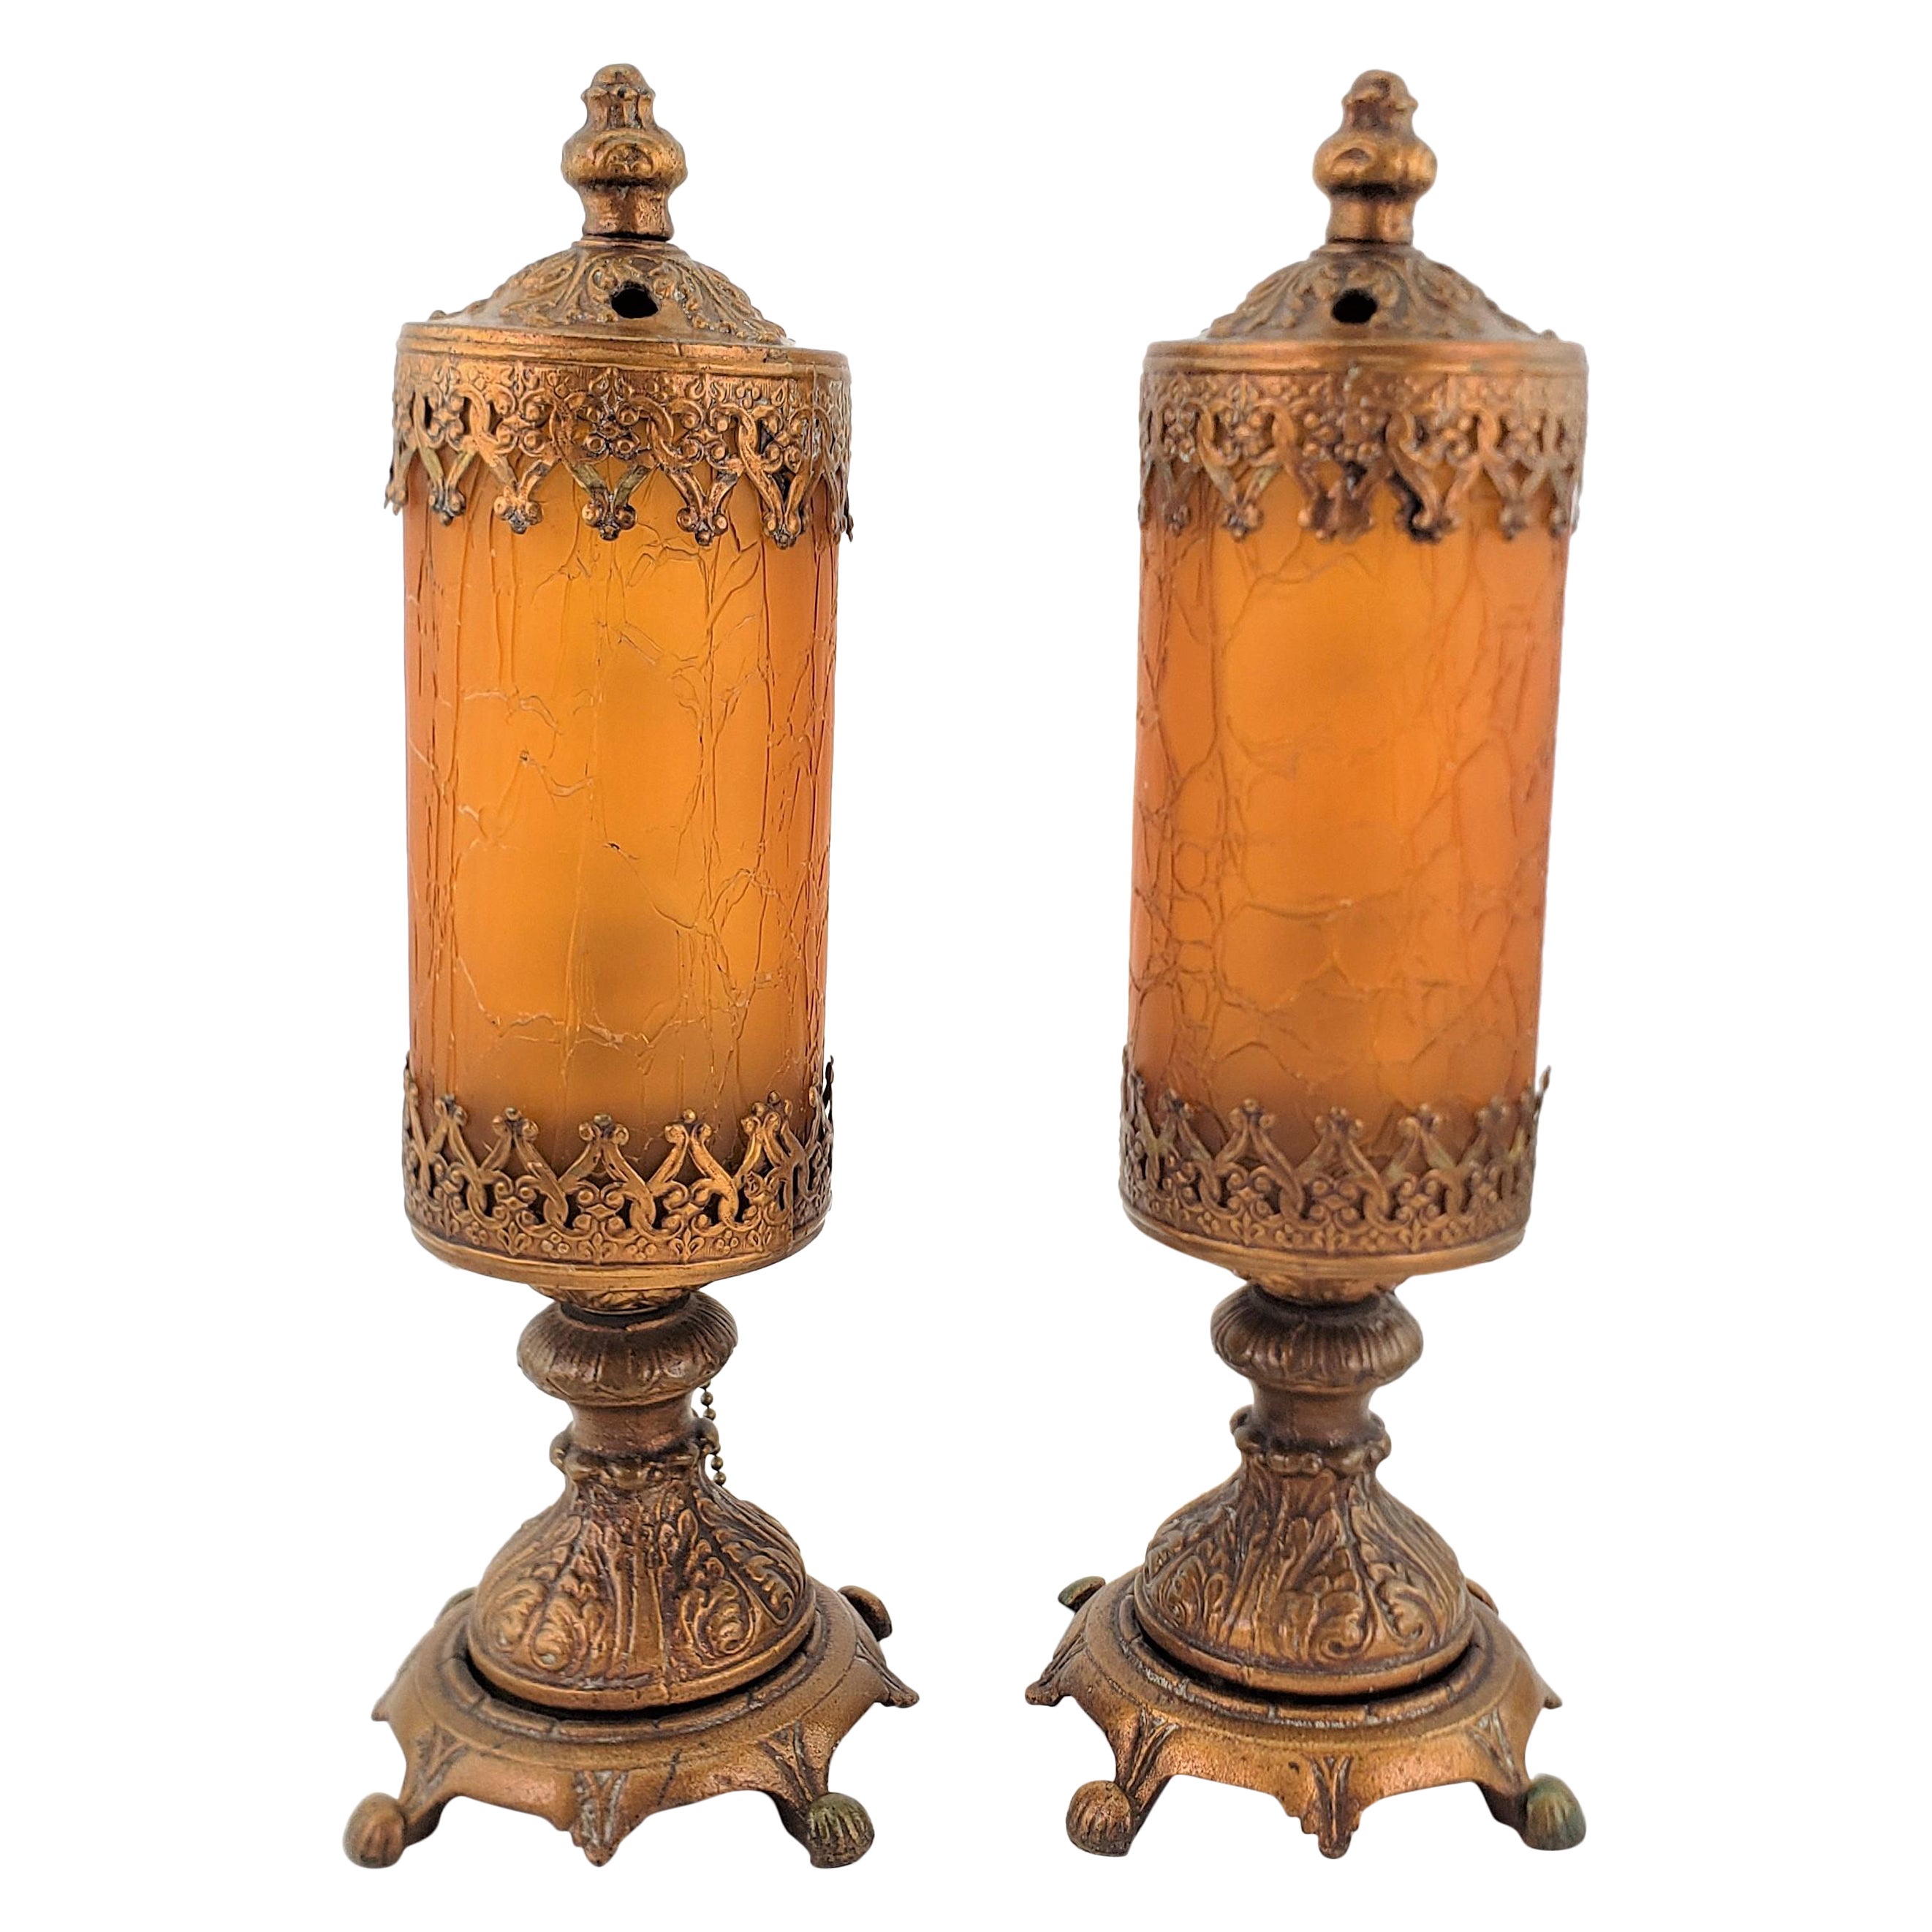 Pair of Antique Styled Accent or Boudoir Table Lamps with Crackle Glass Shades